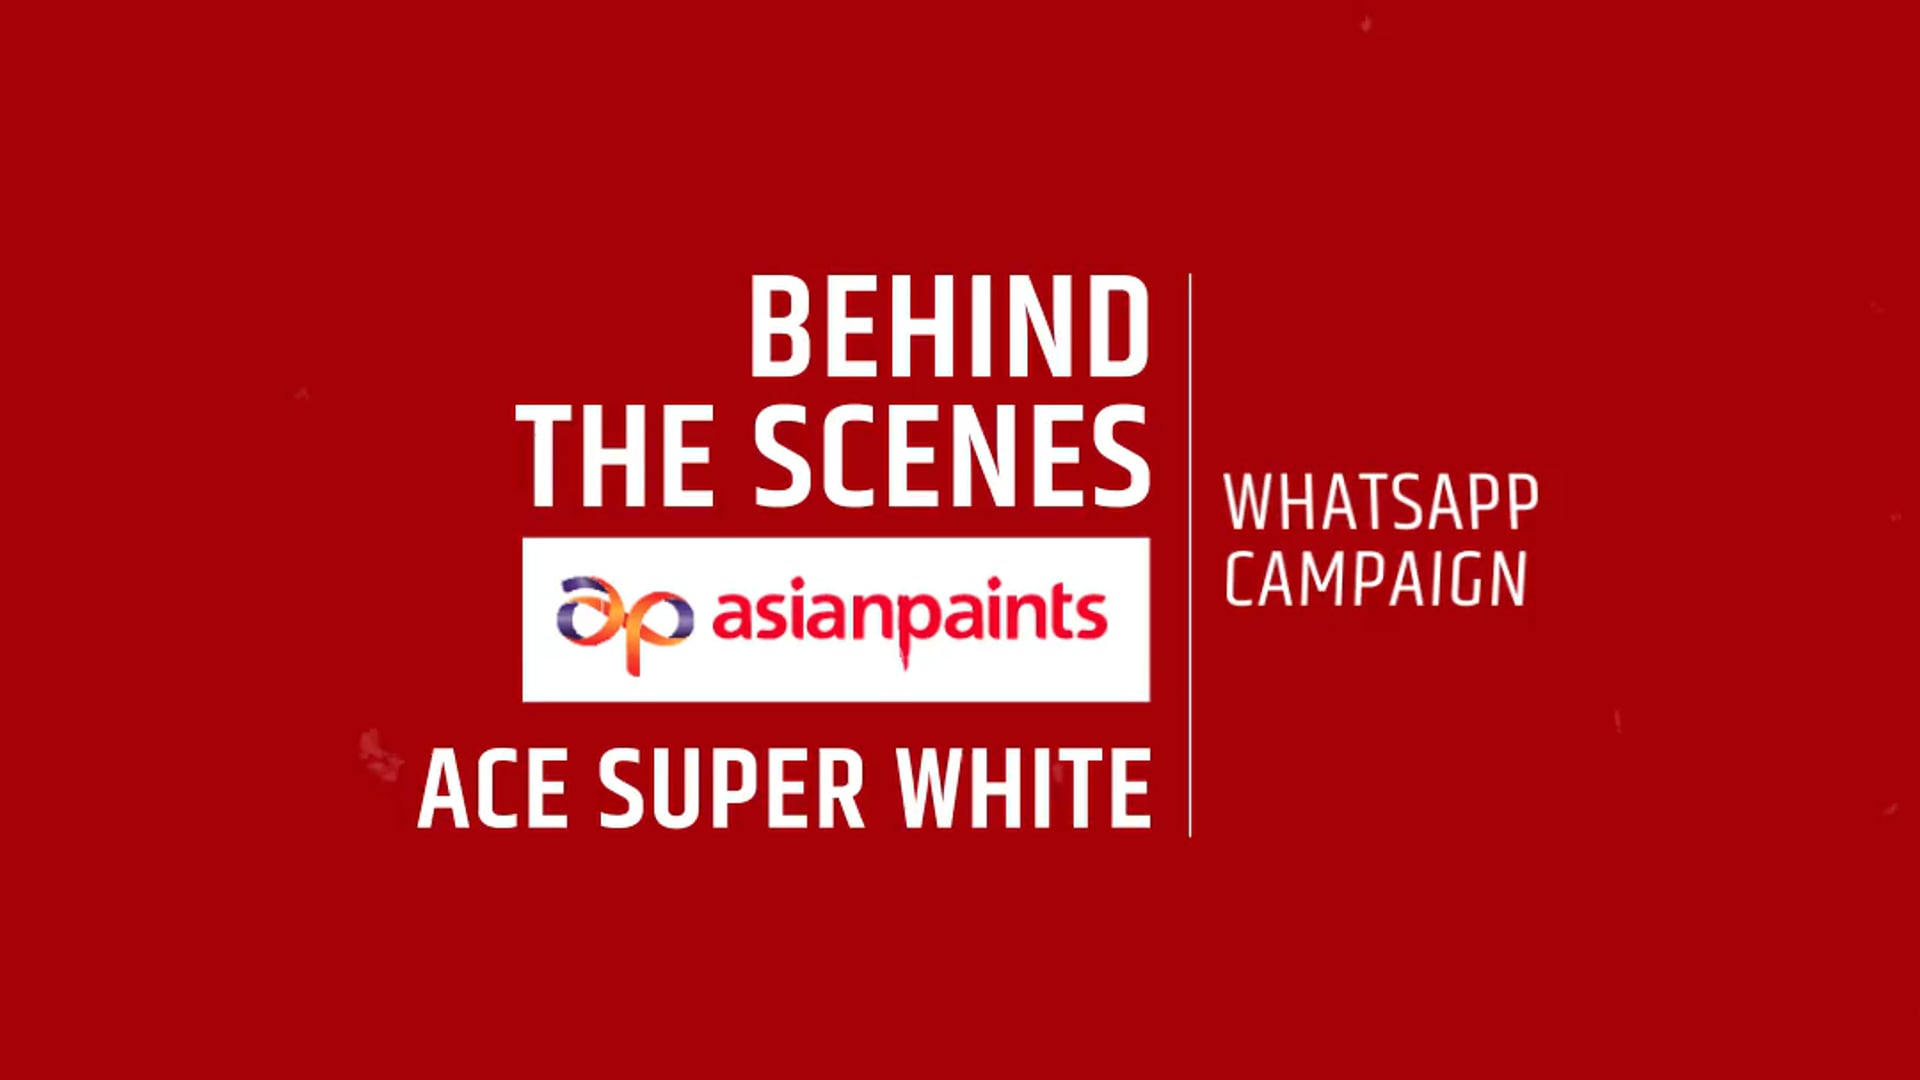 Behind The Scenes | Ace Super White Whatsapp Campaign | Asian Paints 